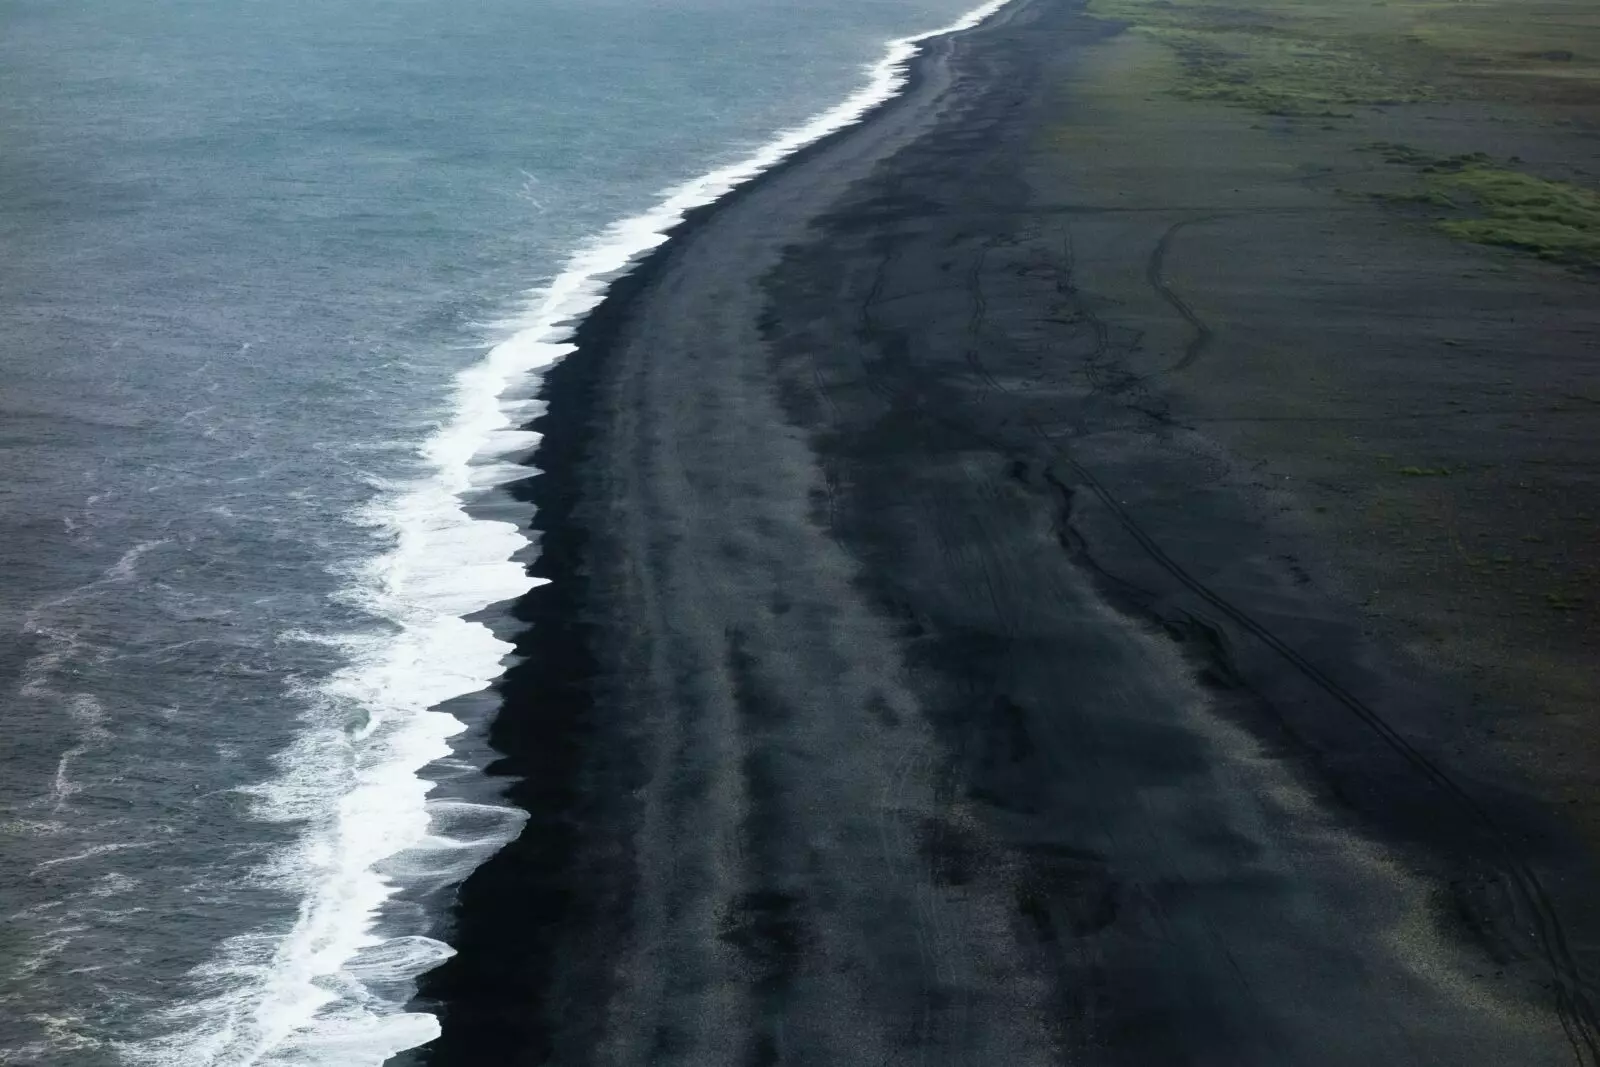 Iceland photo tours - The Black Sand Beach in Iceland